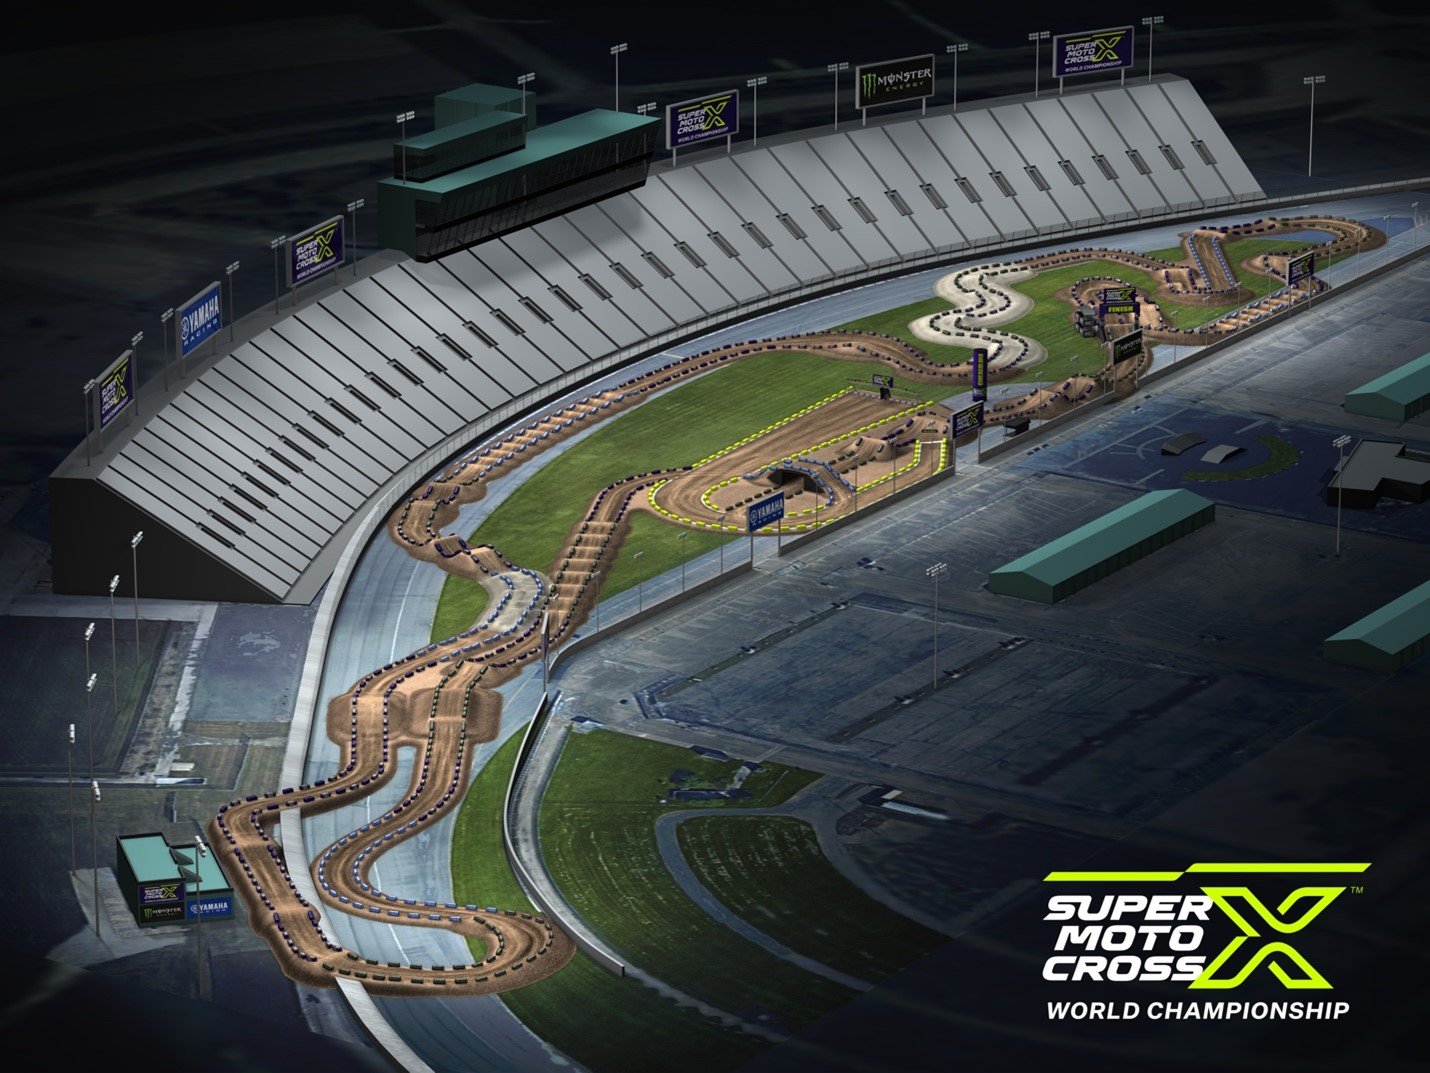 Chicagoland Speedway Track Map   Custom designed track layout will feature the best of both worlds – Supercross and Pro Motocross.